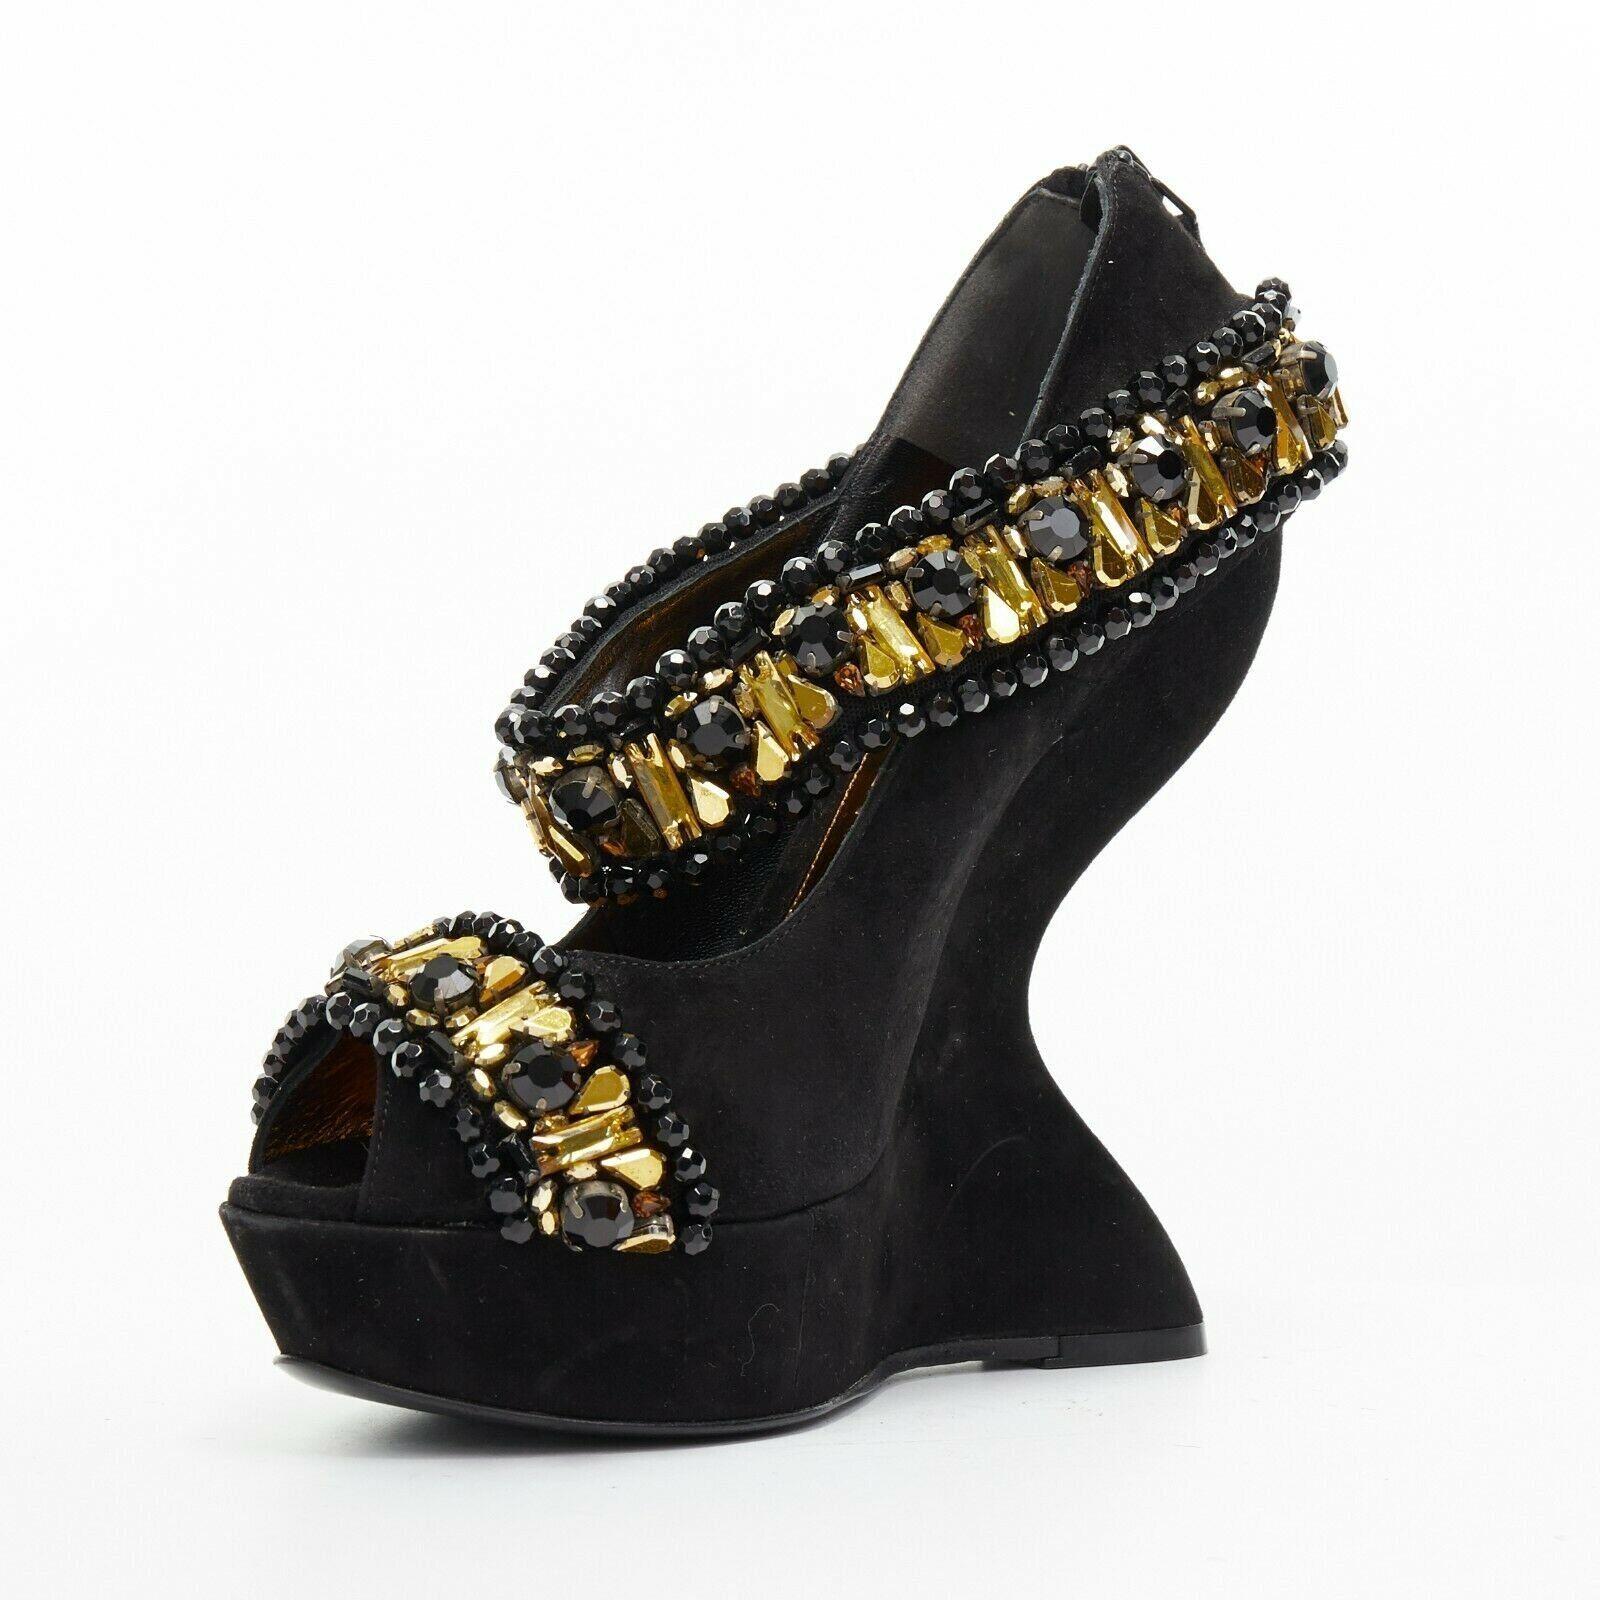 New Alexander McQueen Black Champagne Embellished Wedge Shoes Italian 38 In New Condition For Sale In Montgomery, TX